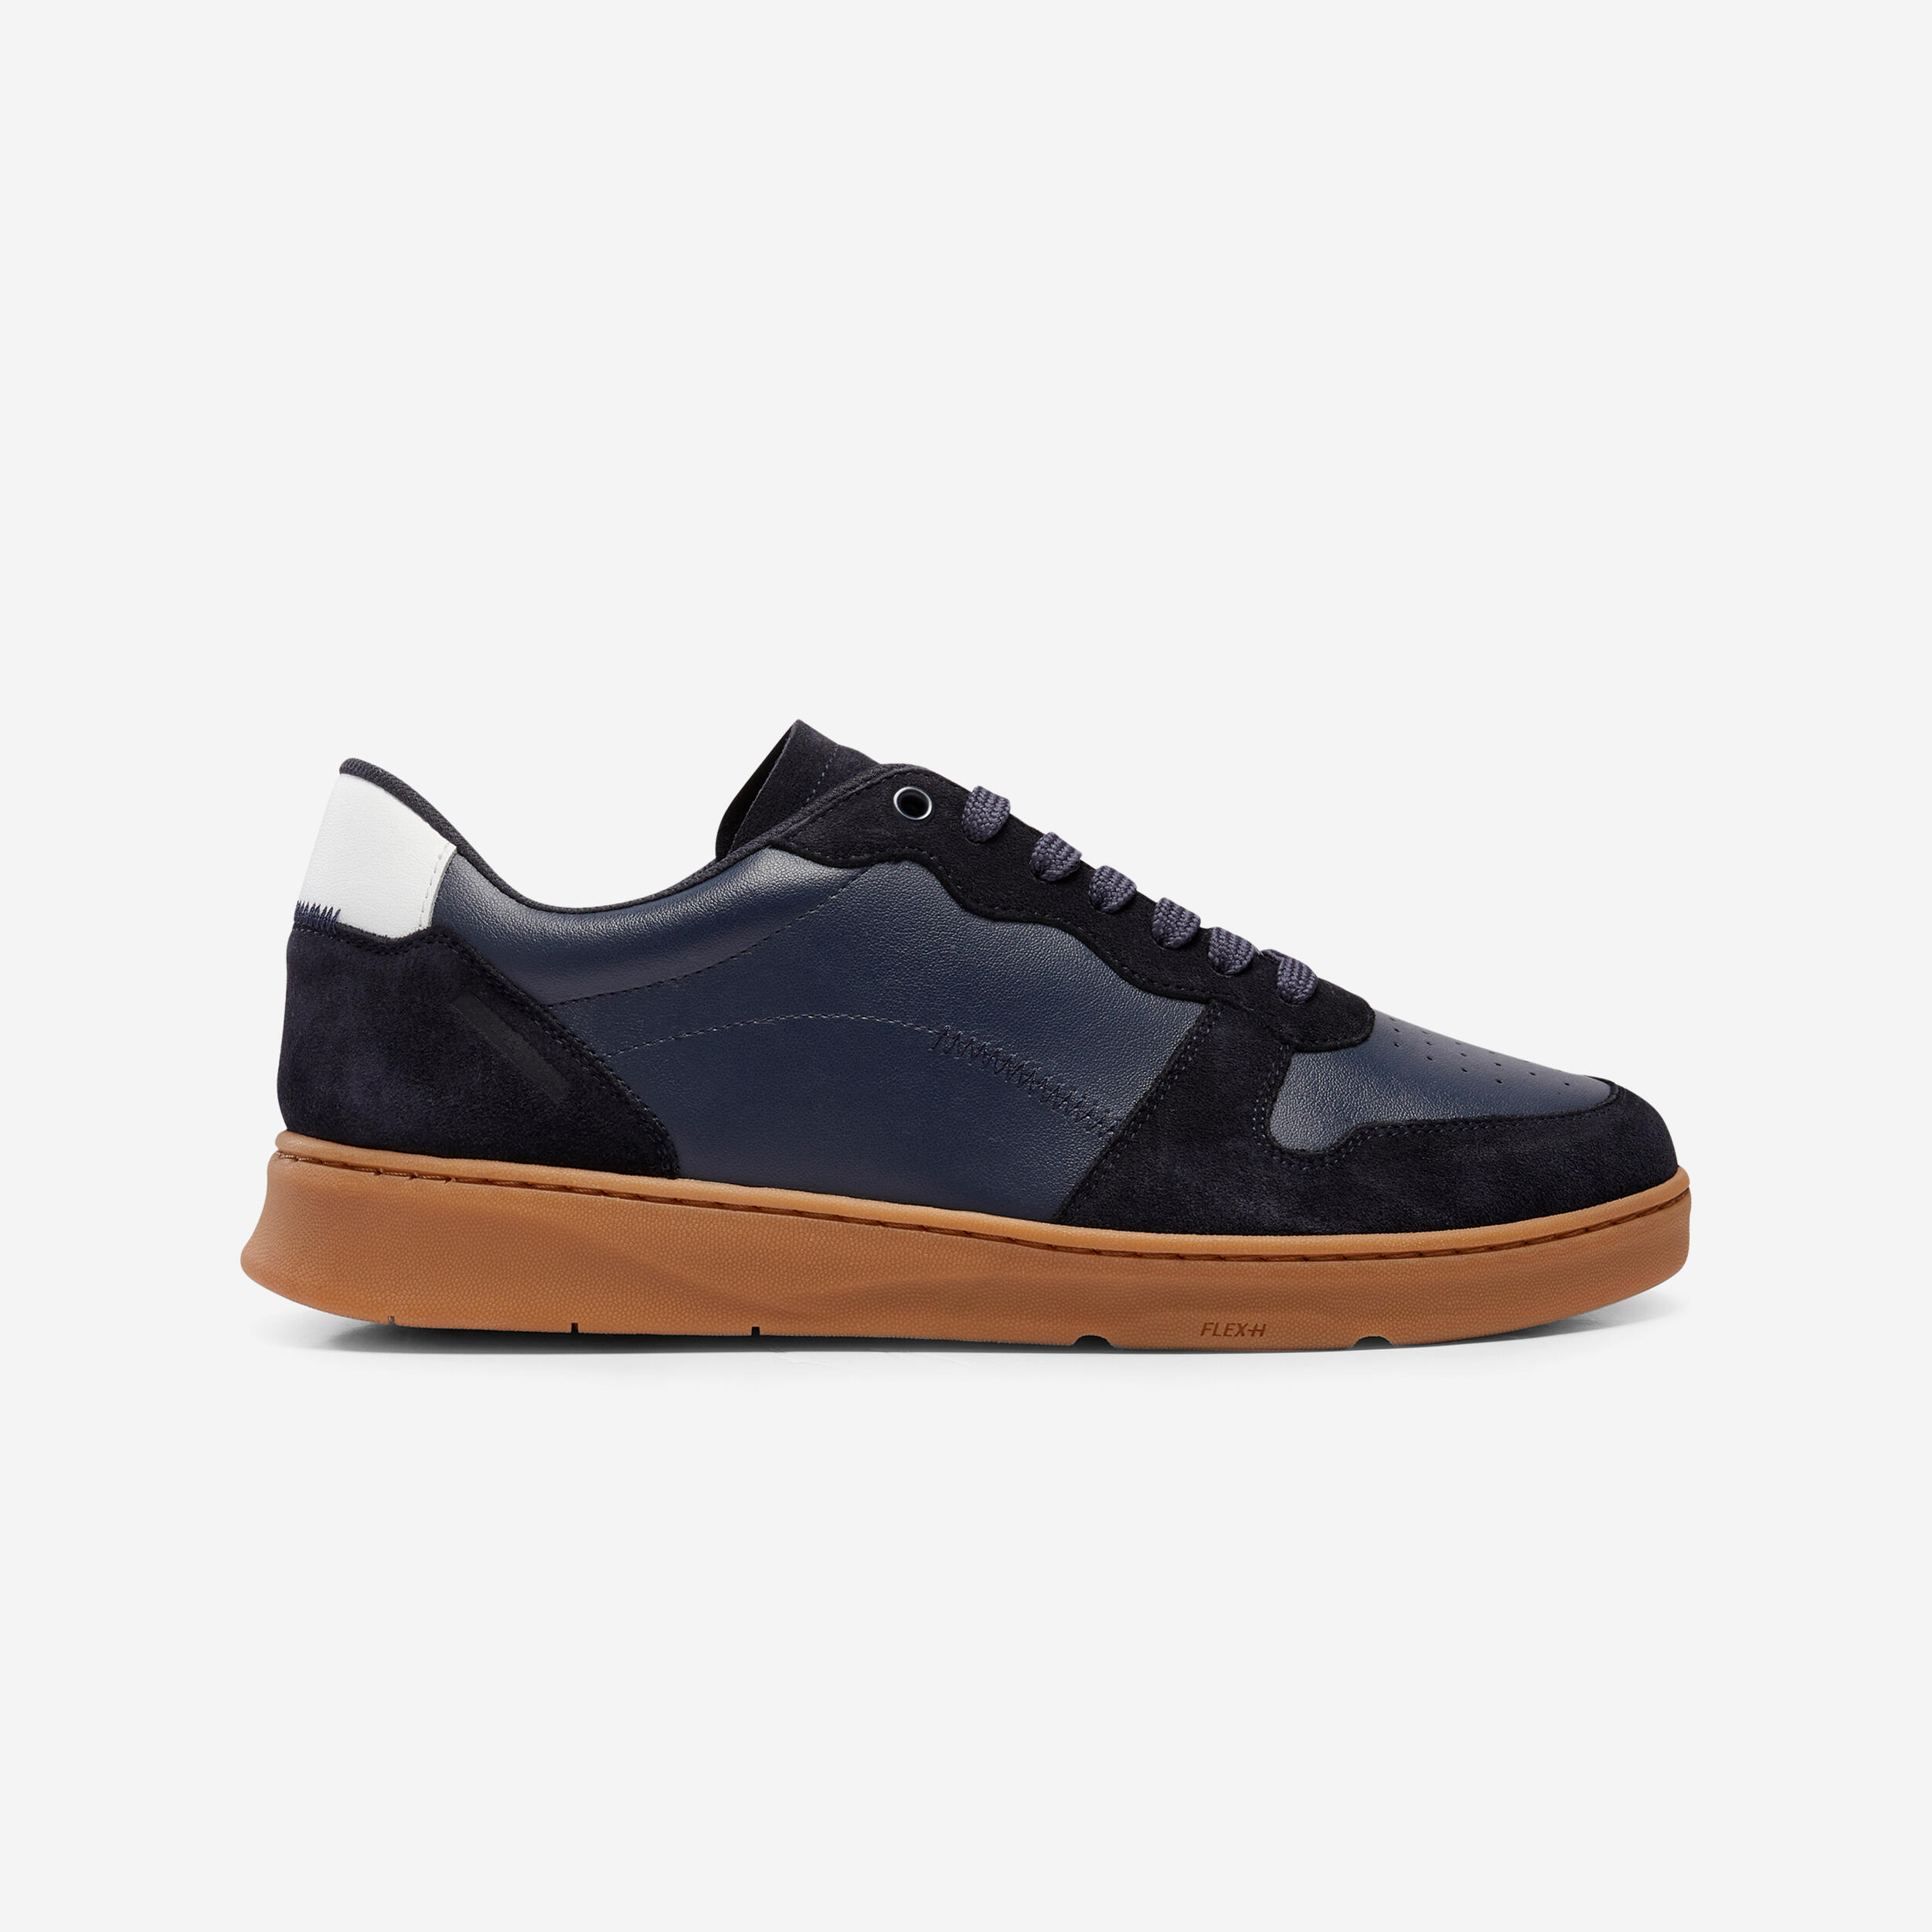 MEN'S WALK PROTECT LEATHER TRAINERS - NAVY BLUE 1/7